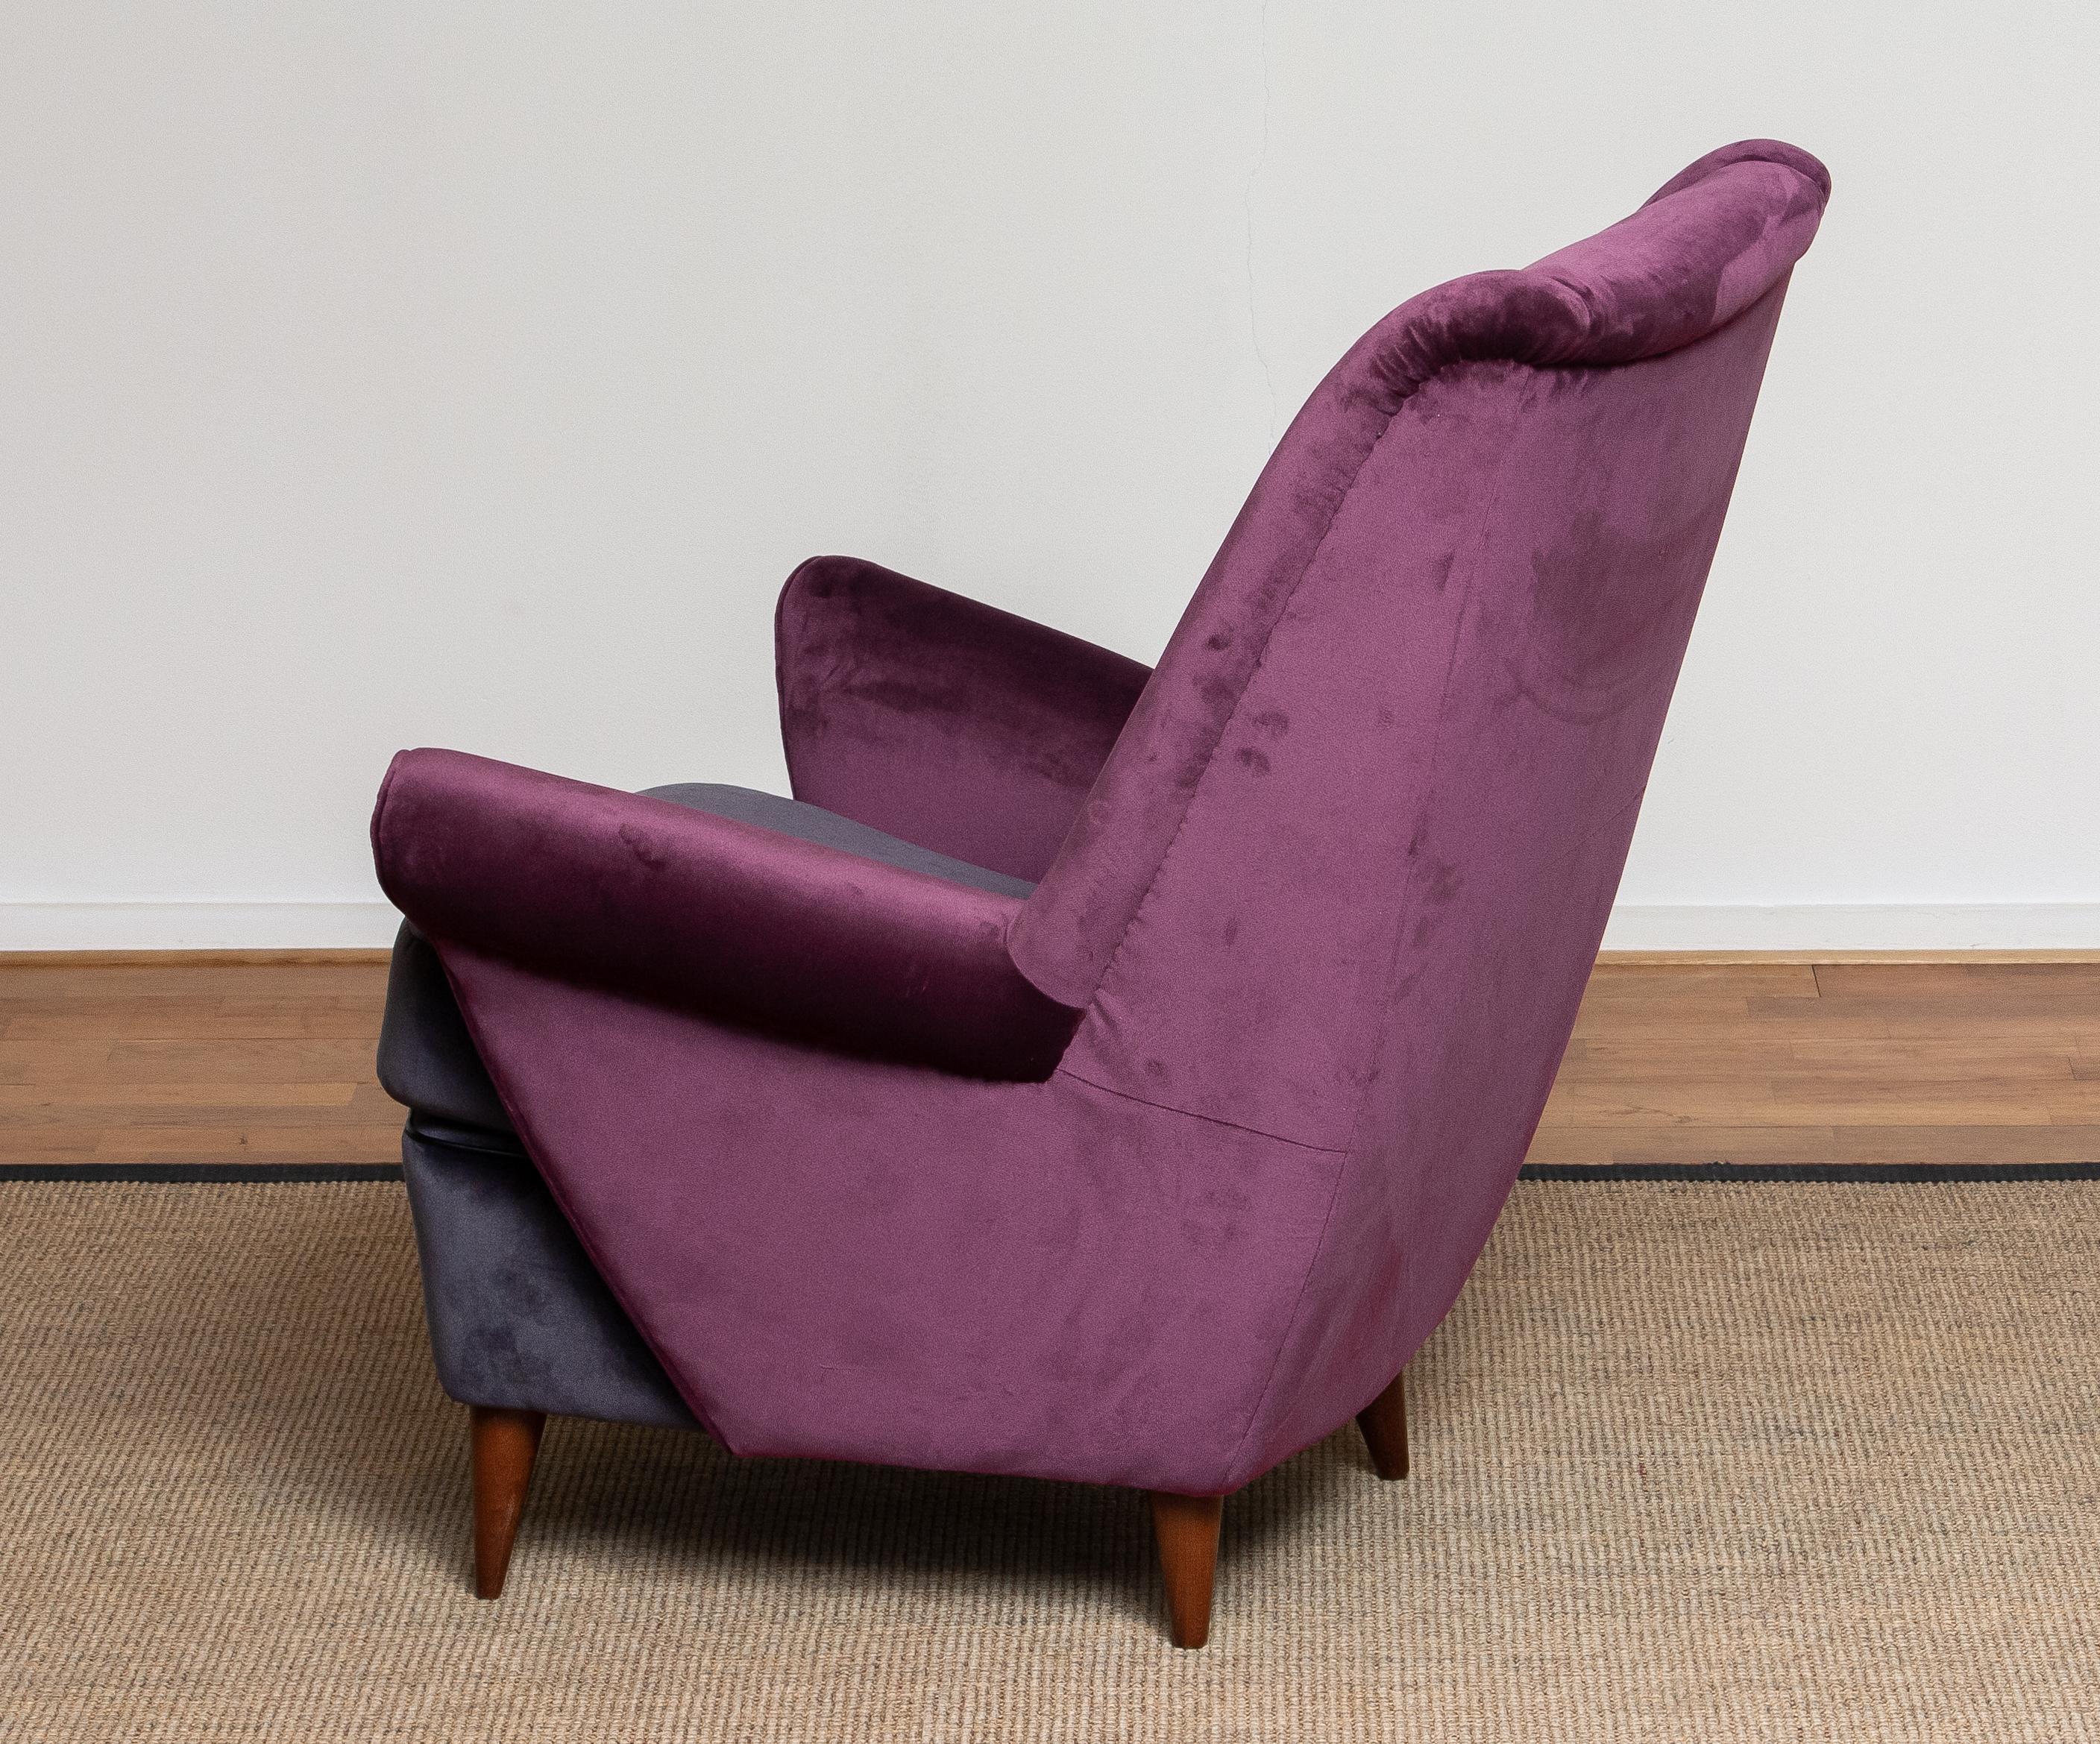 50's Lounge / Easy Chair in Magenta by Designed Gio Ponti for ISA Bergamo, Italy 1